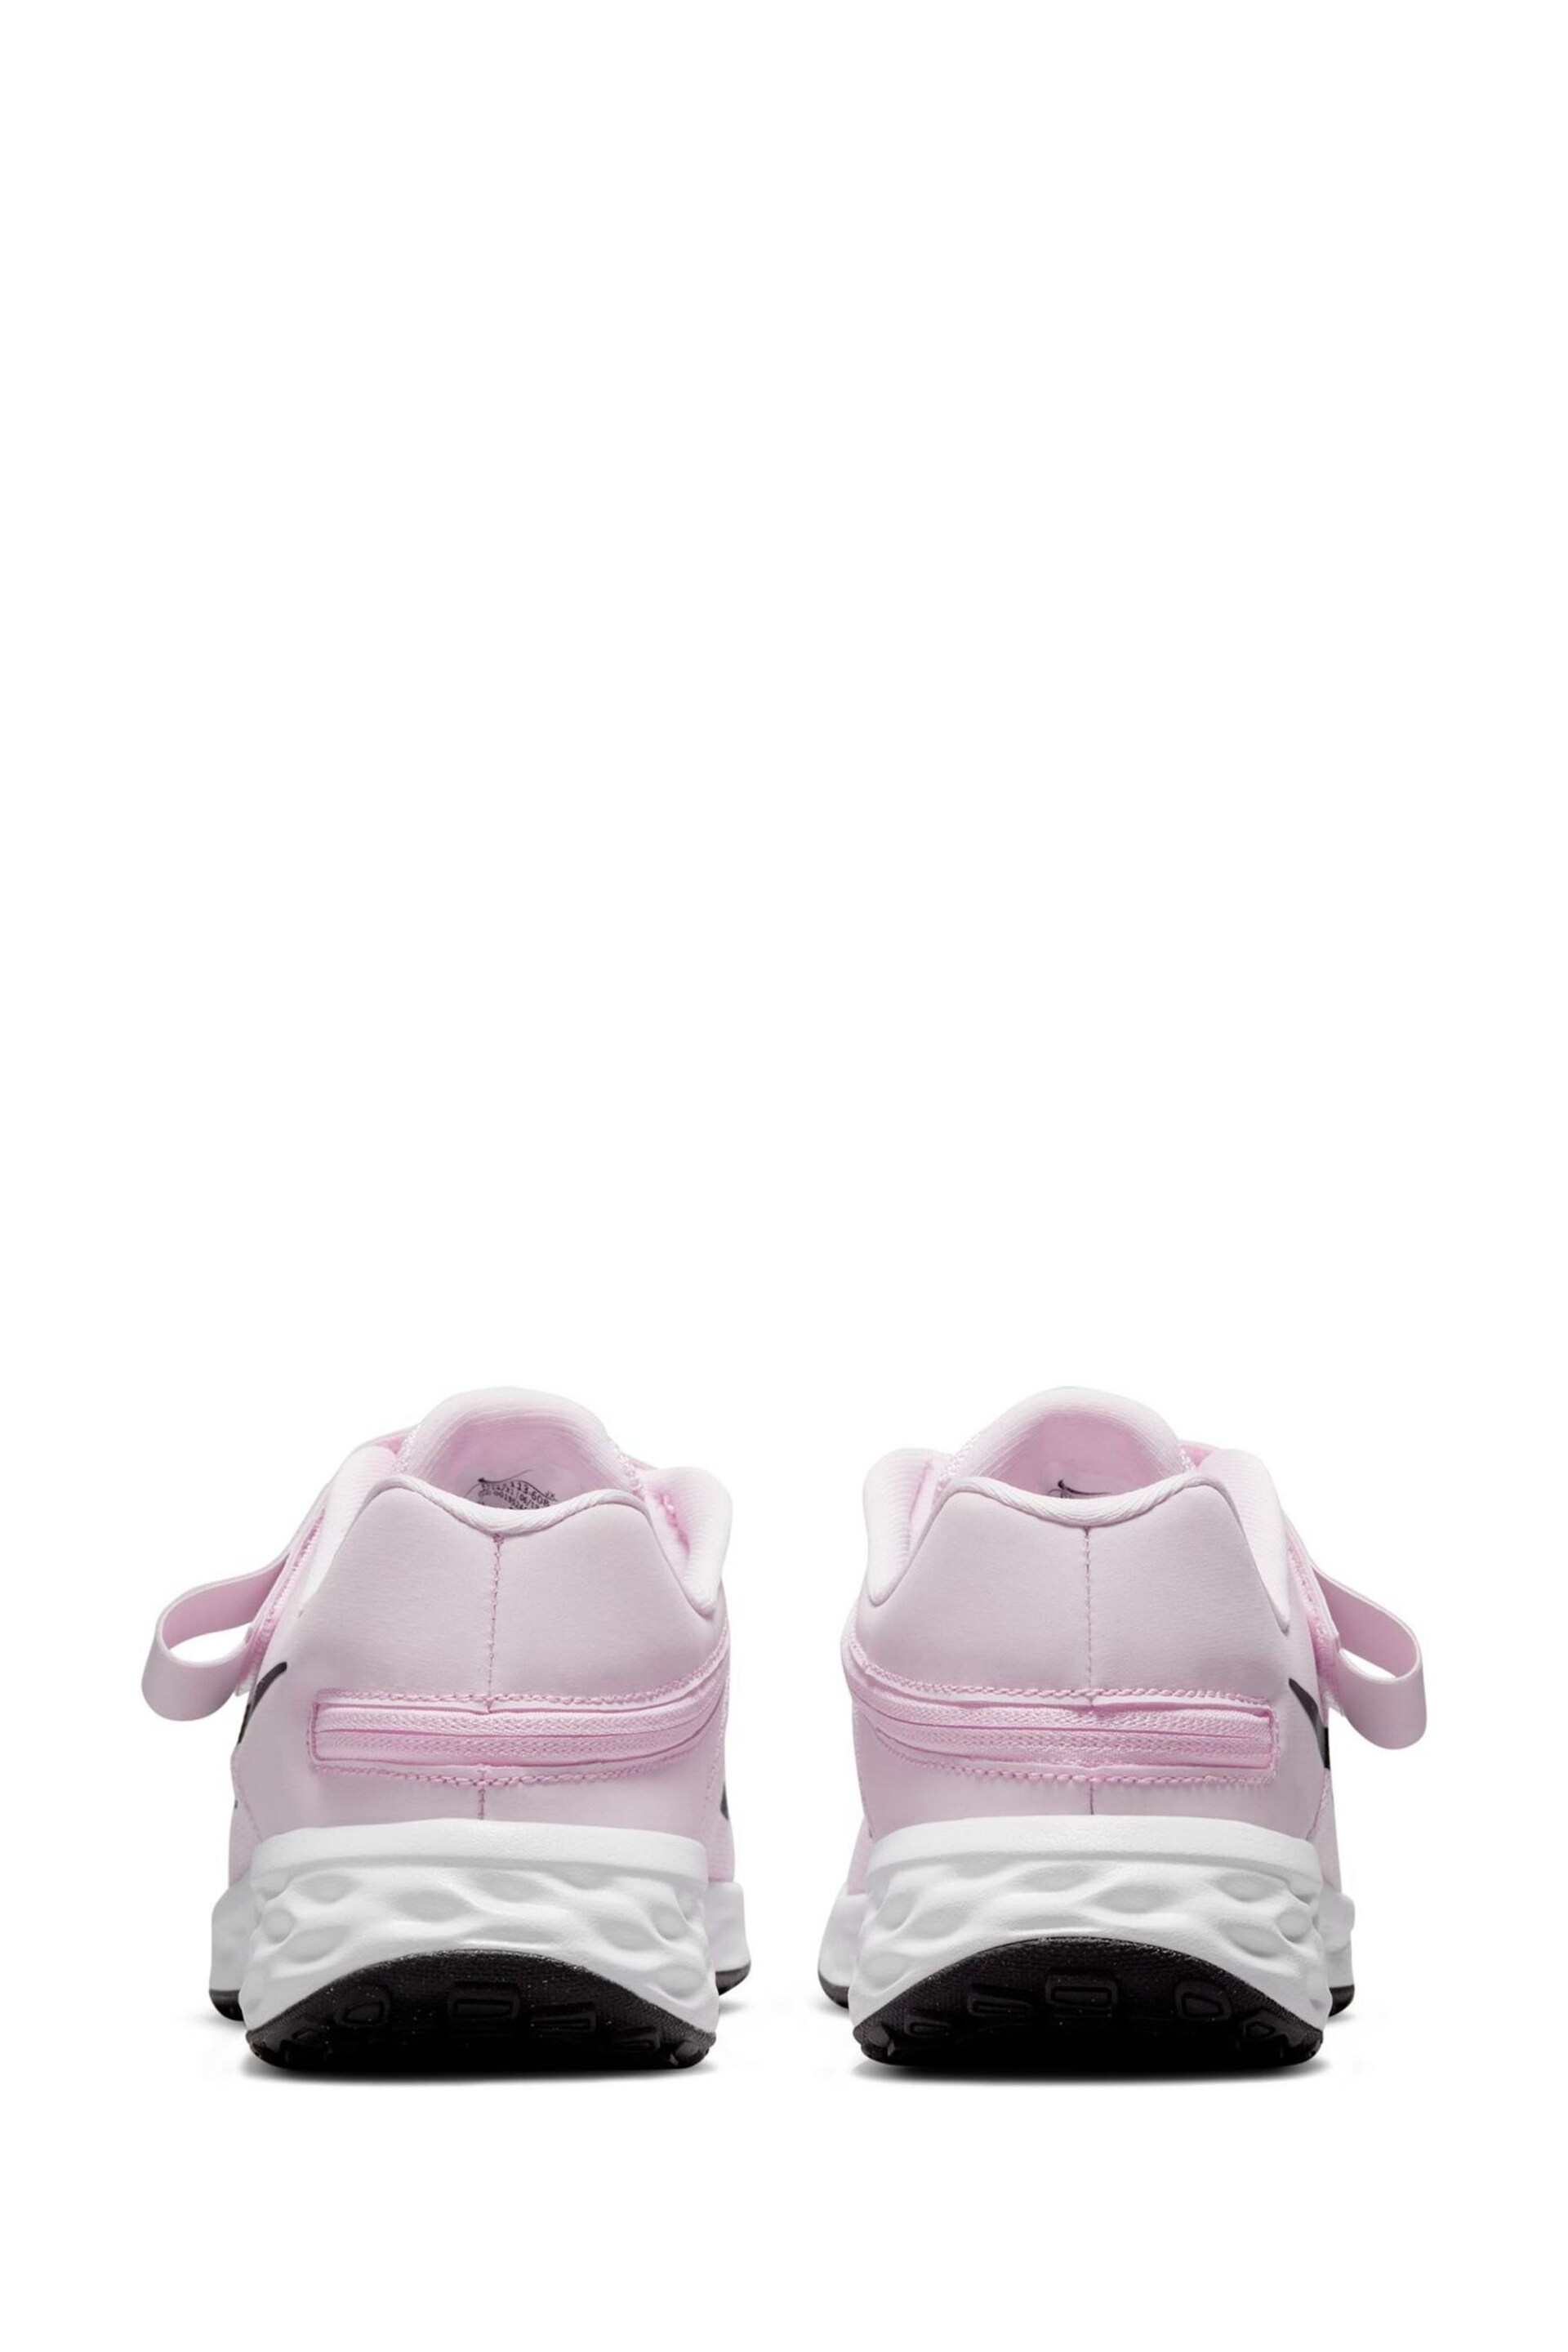 Nike Pink Revolution 6 FlyEase Easy On/Off Trainers - Image 6 of 10